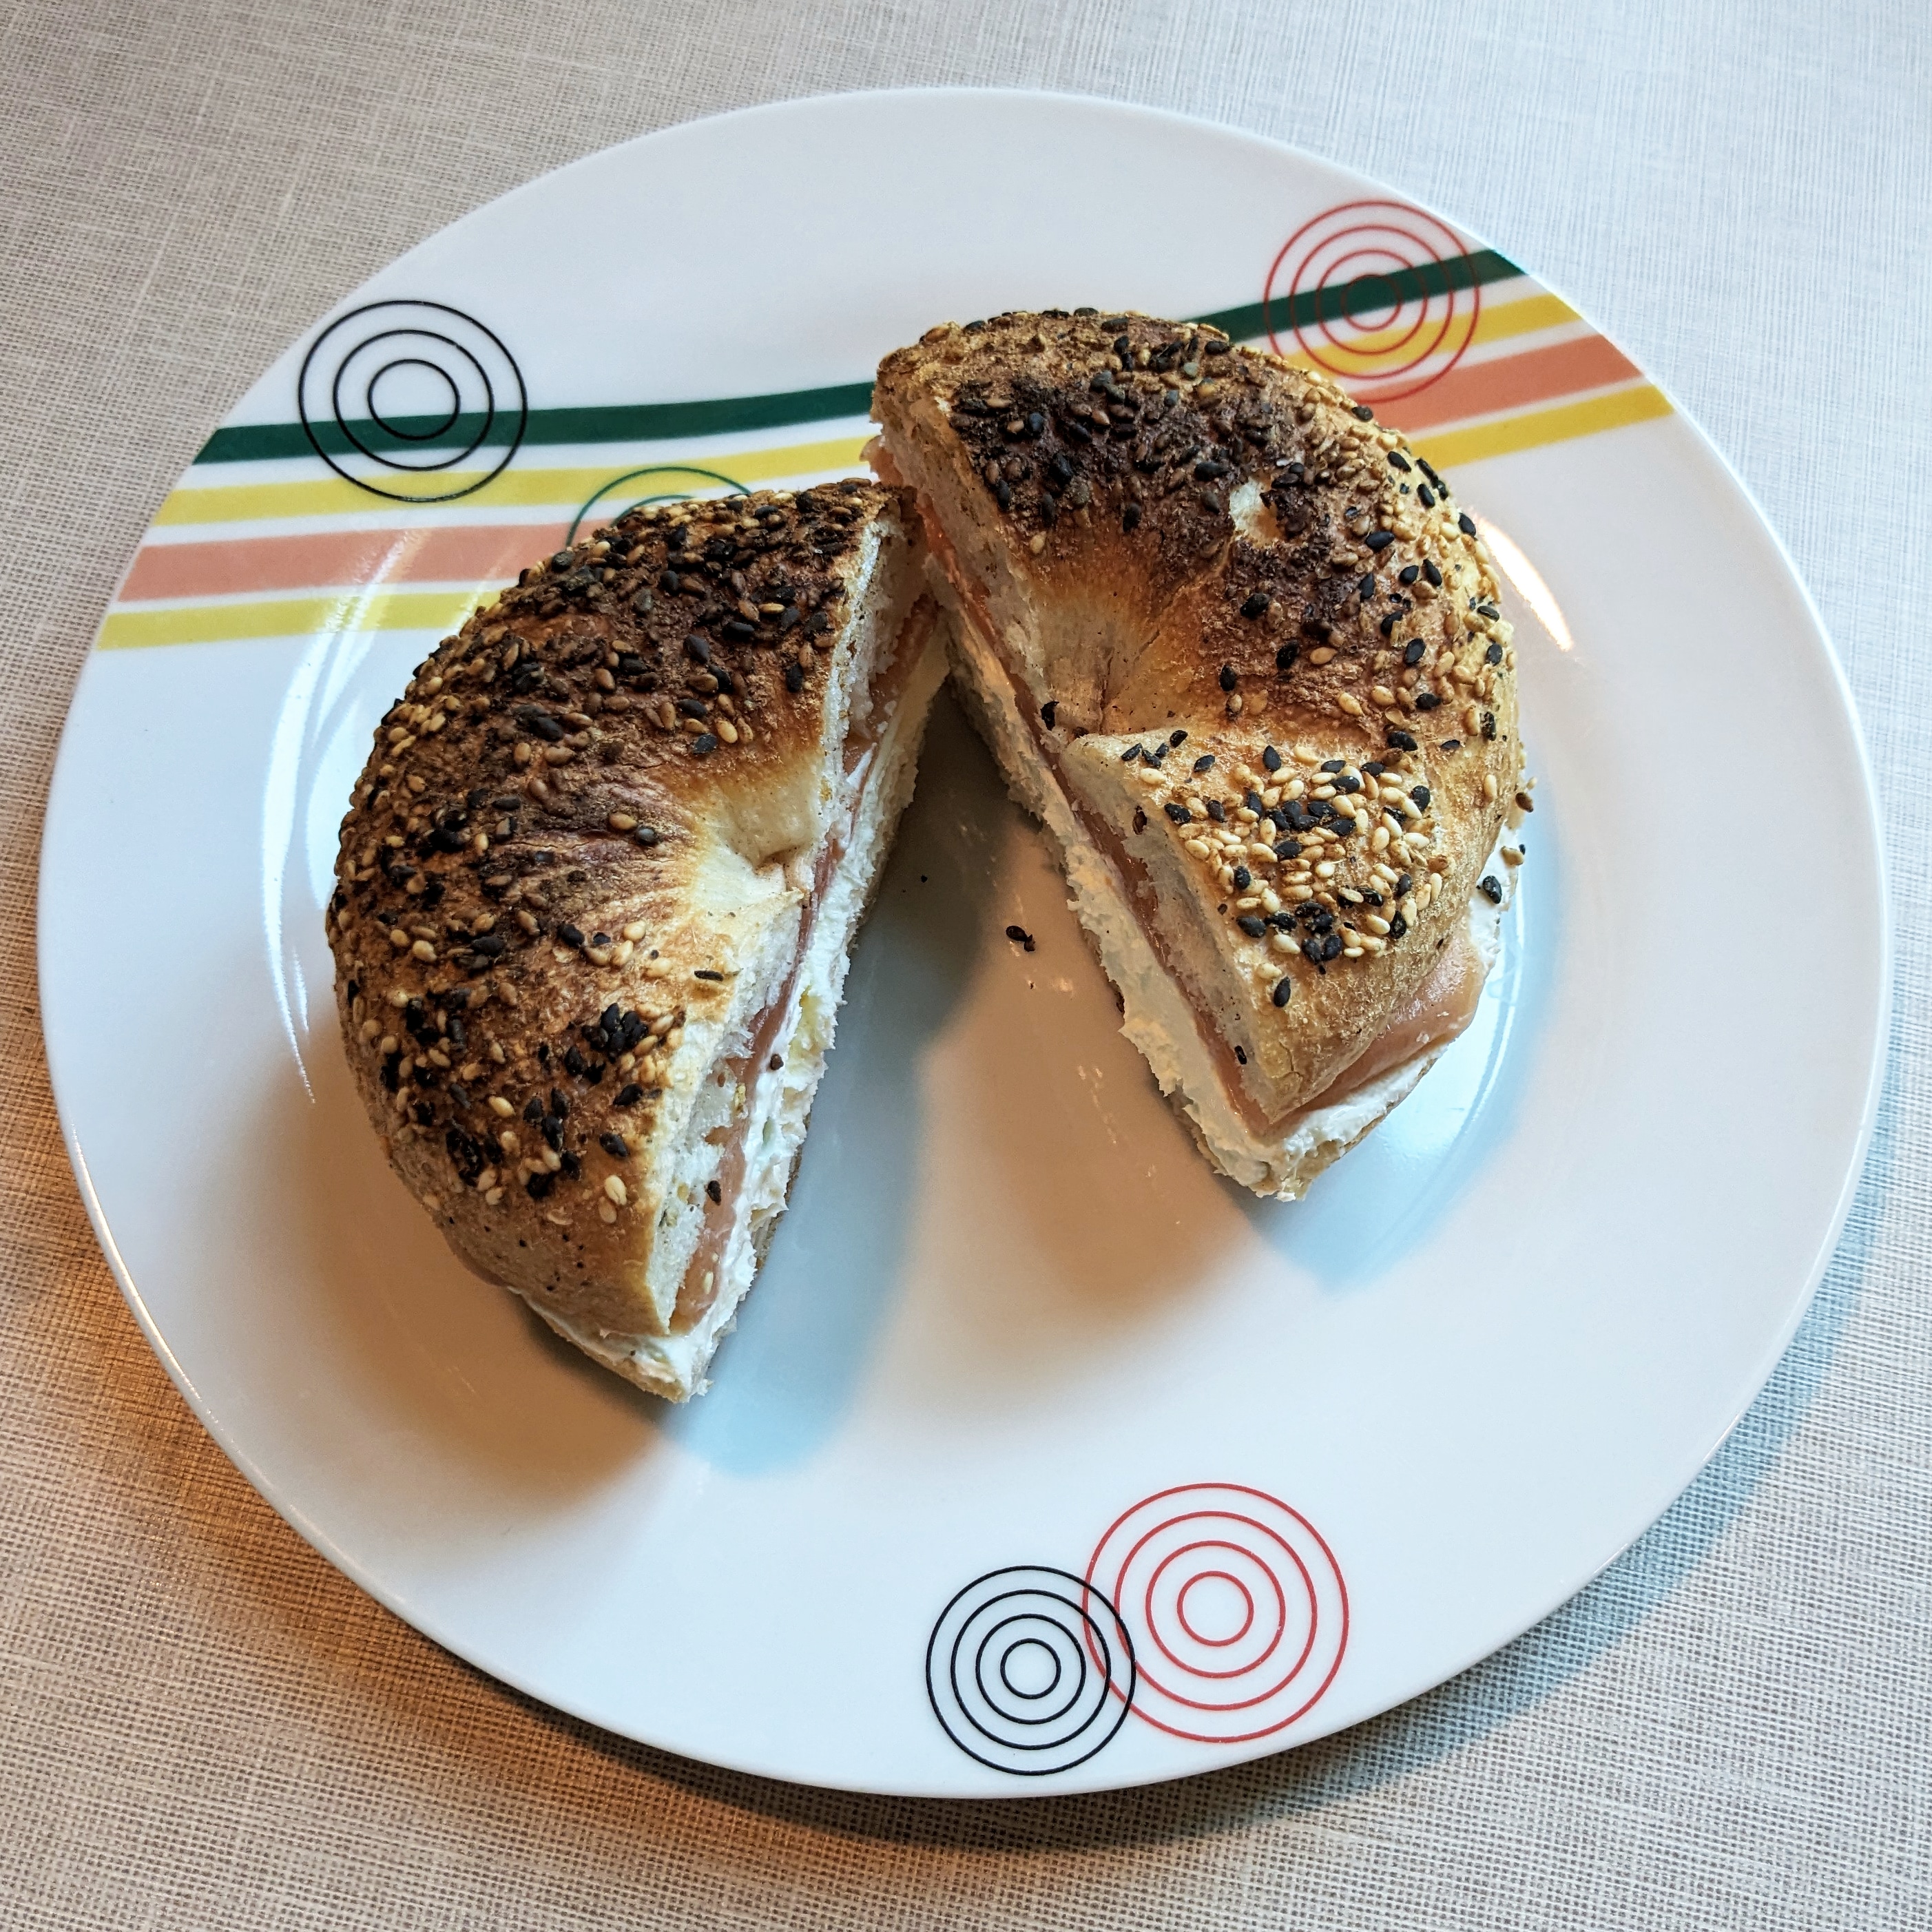 A toasted bagel filled with smoked salmon and cream cheese from Bagels Tbilisi, one of the best places for breakfast in the city